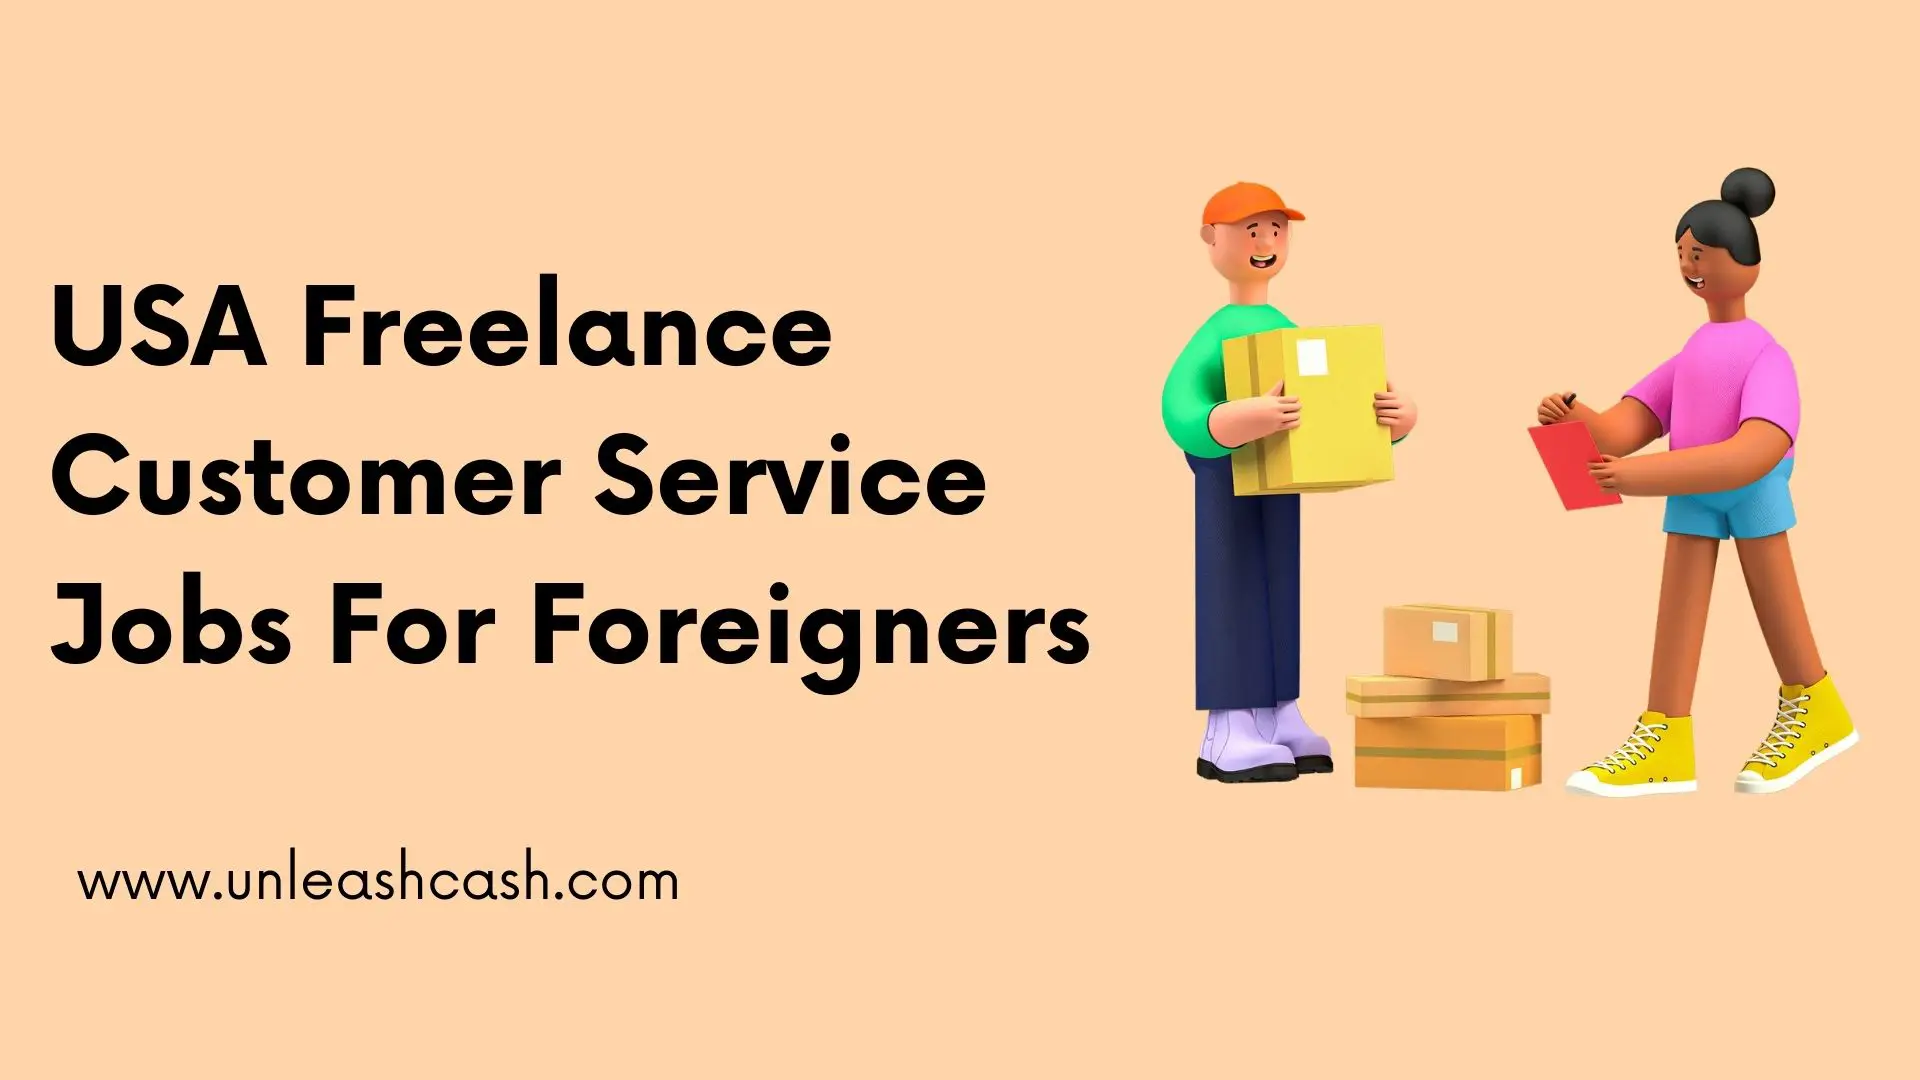 USA Freelance Customer Service Jobs For Foreigners